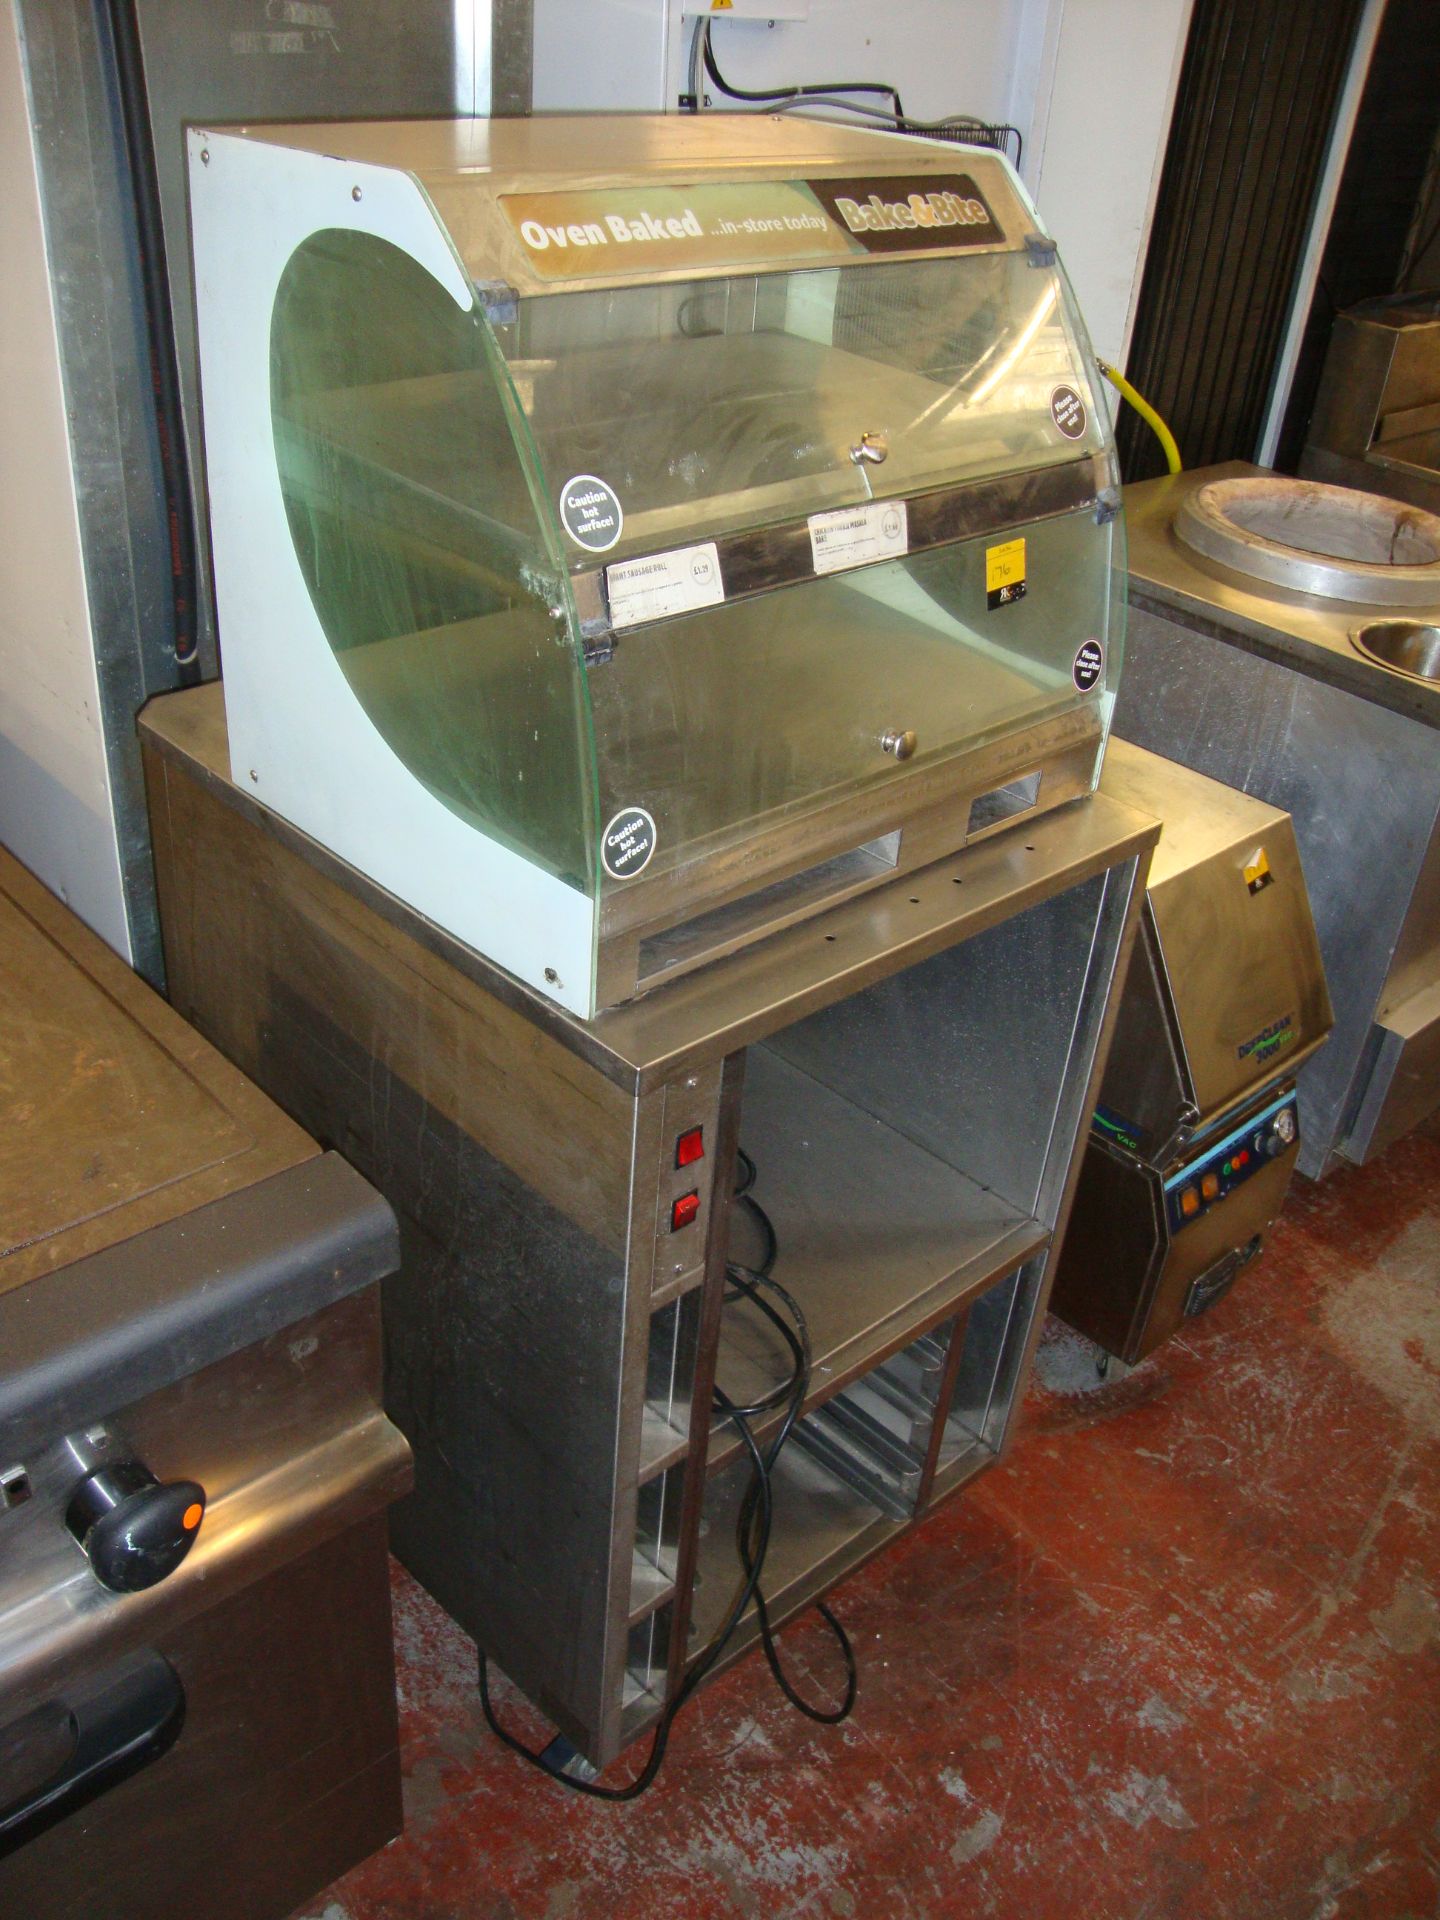 Metal warming trolley with oven baked display unit above